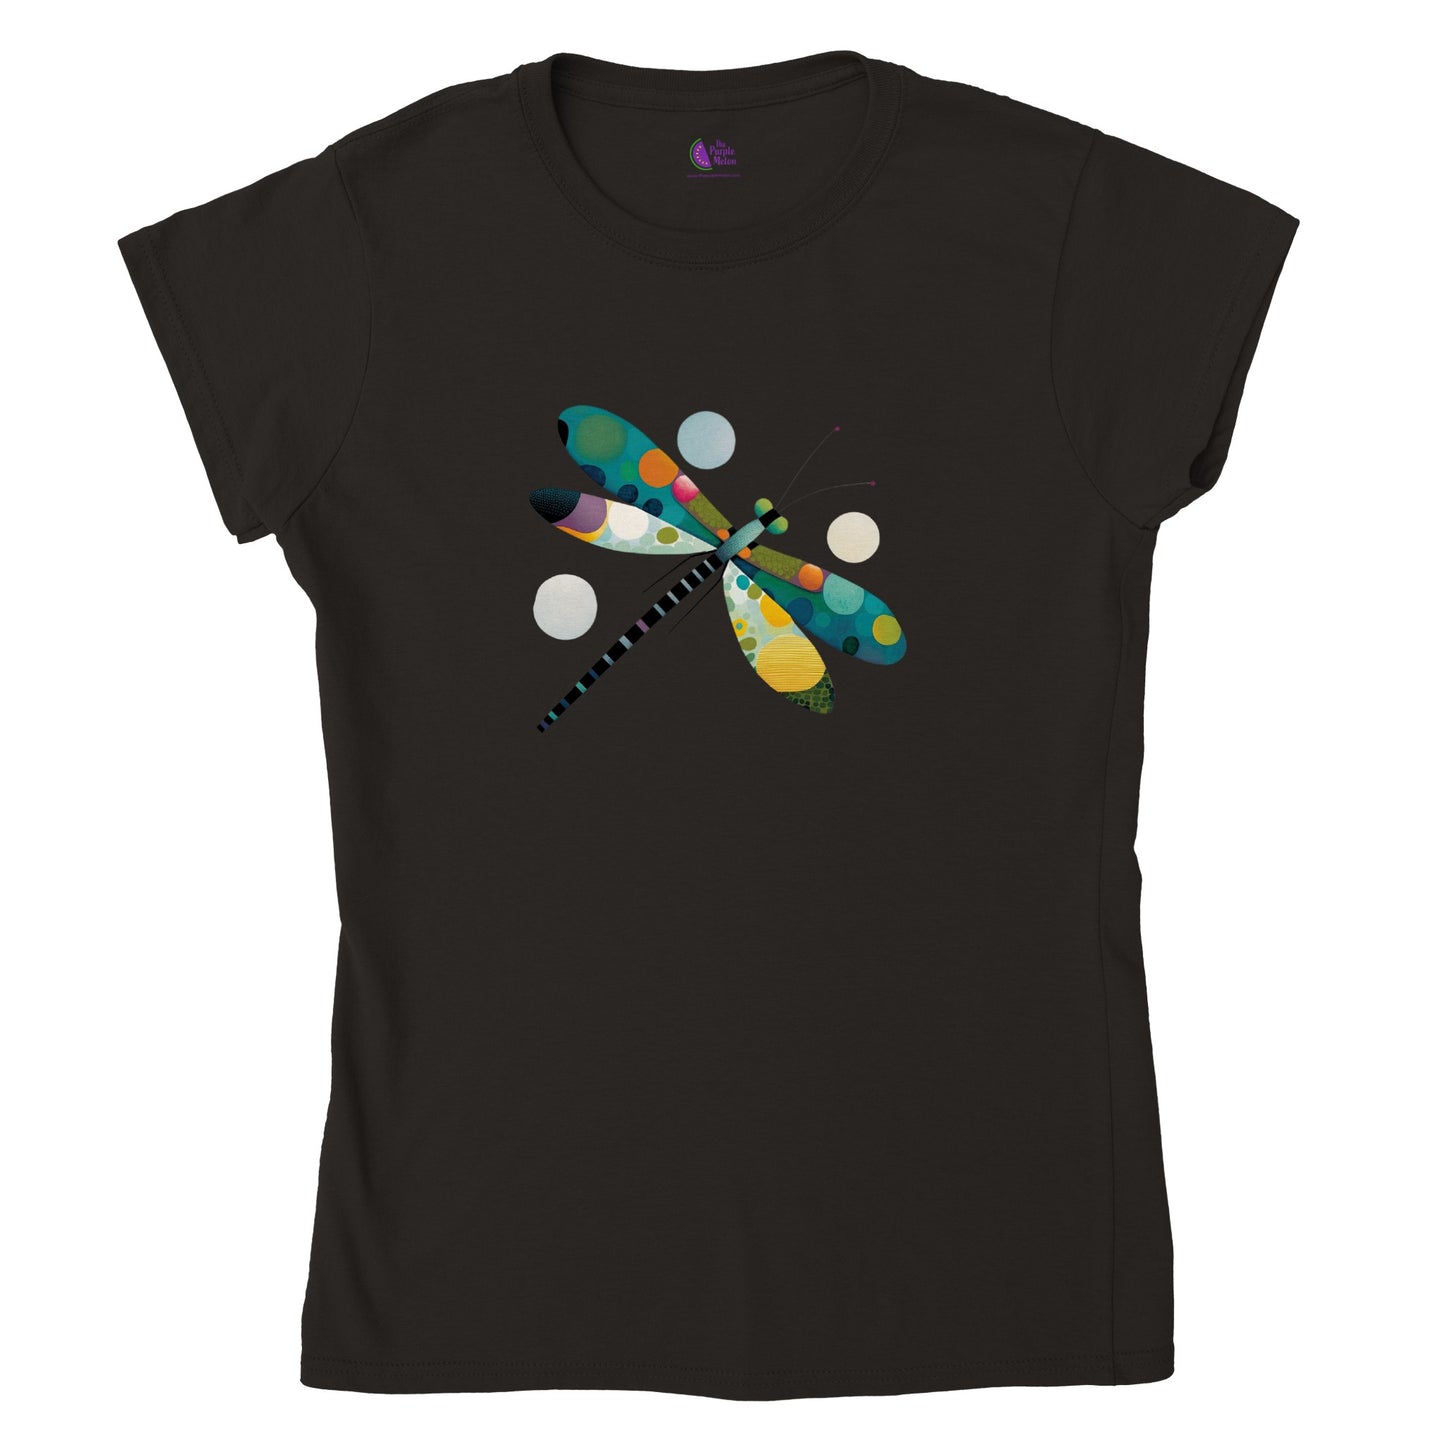 Black t-shirt with an abstract colourful dragonfly print